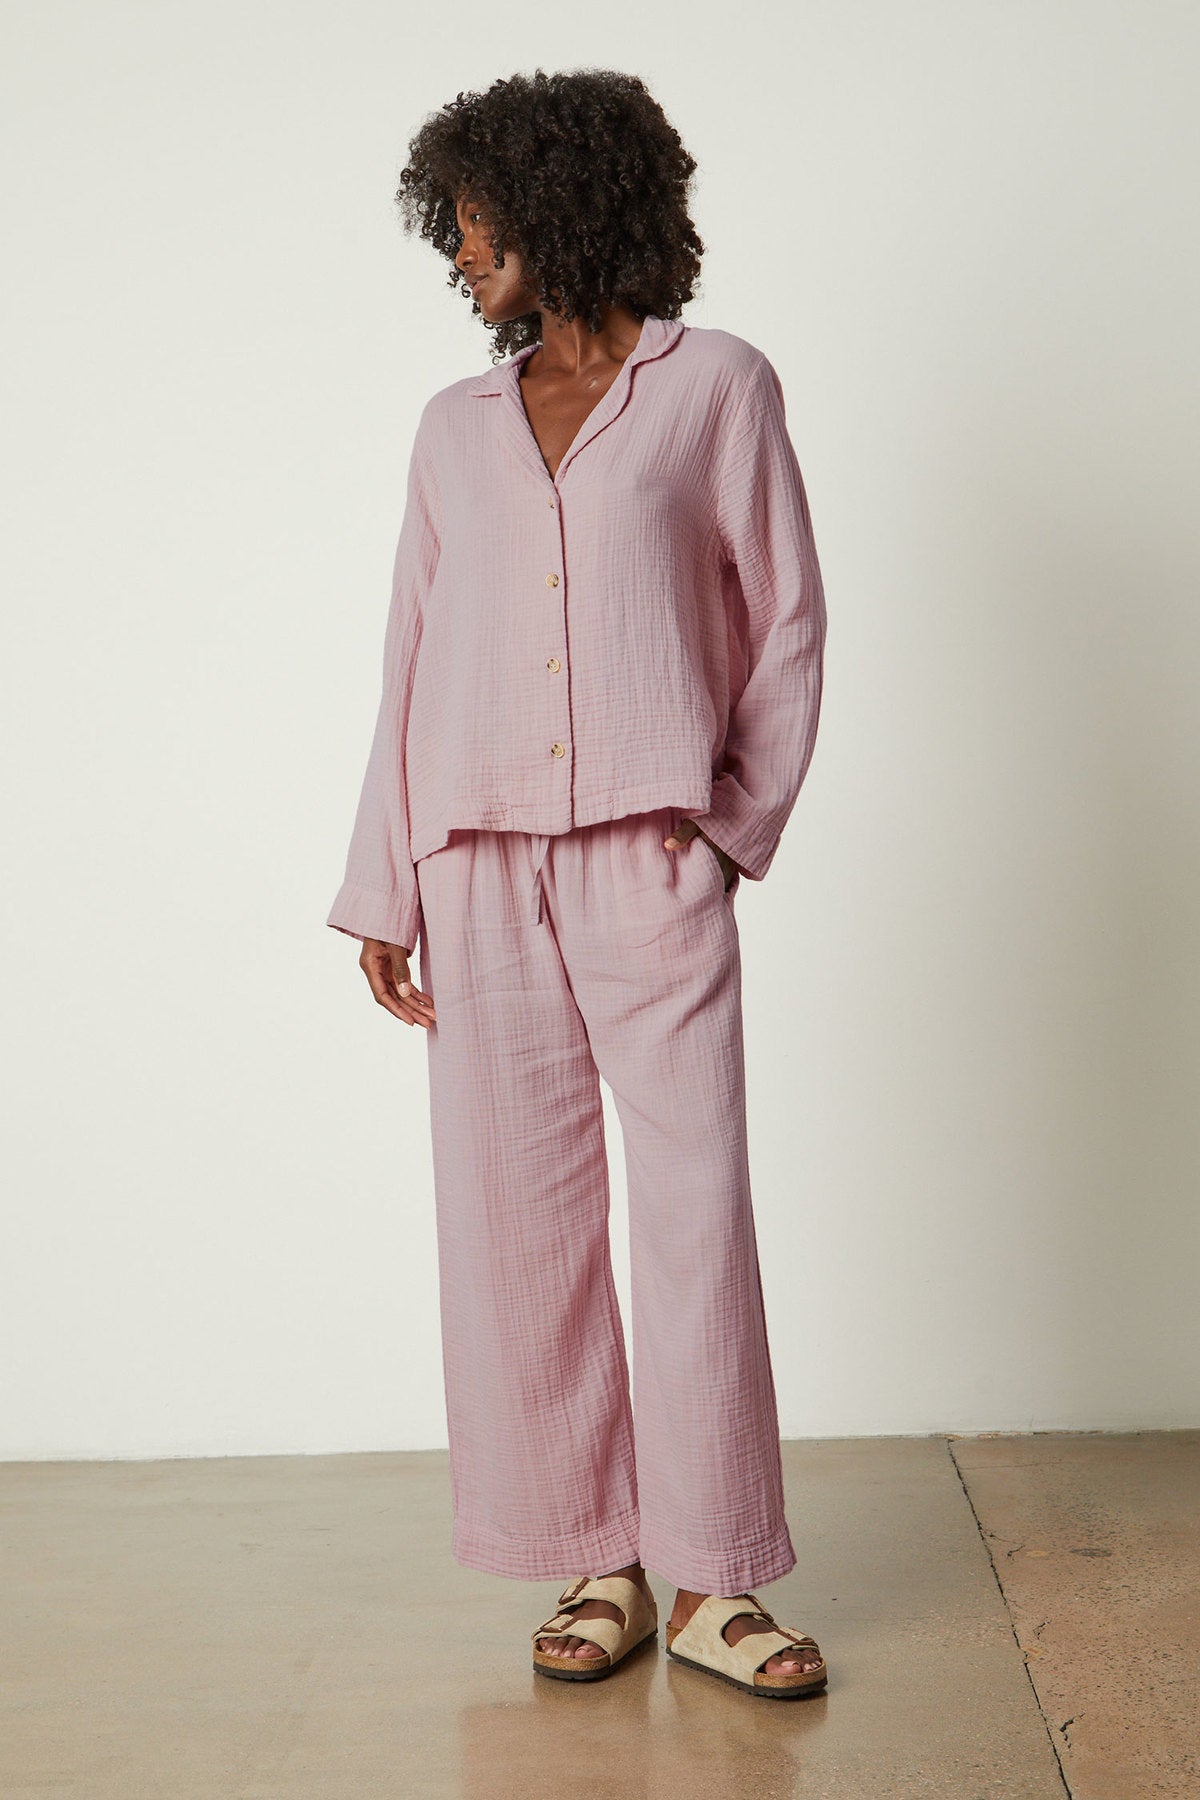 The model is wearing a pink linen Jenny Graham Home PAJAMA PANT set.-26311382696129